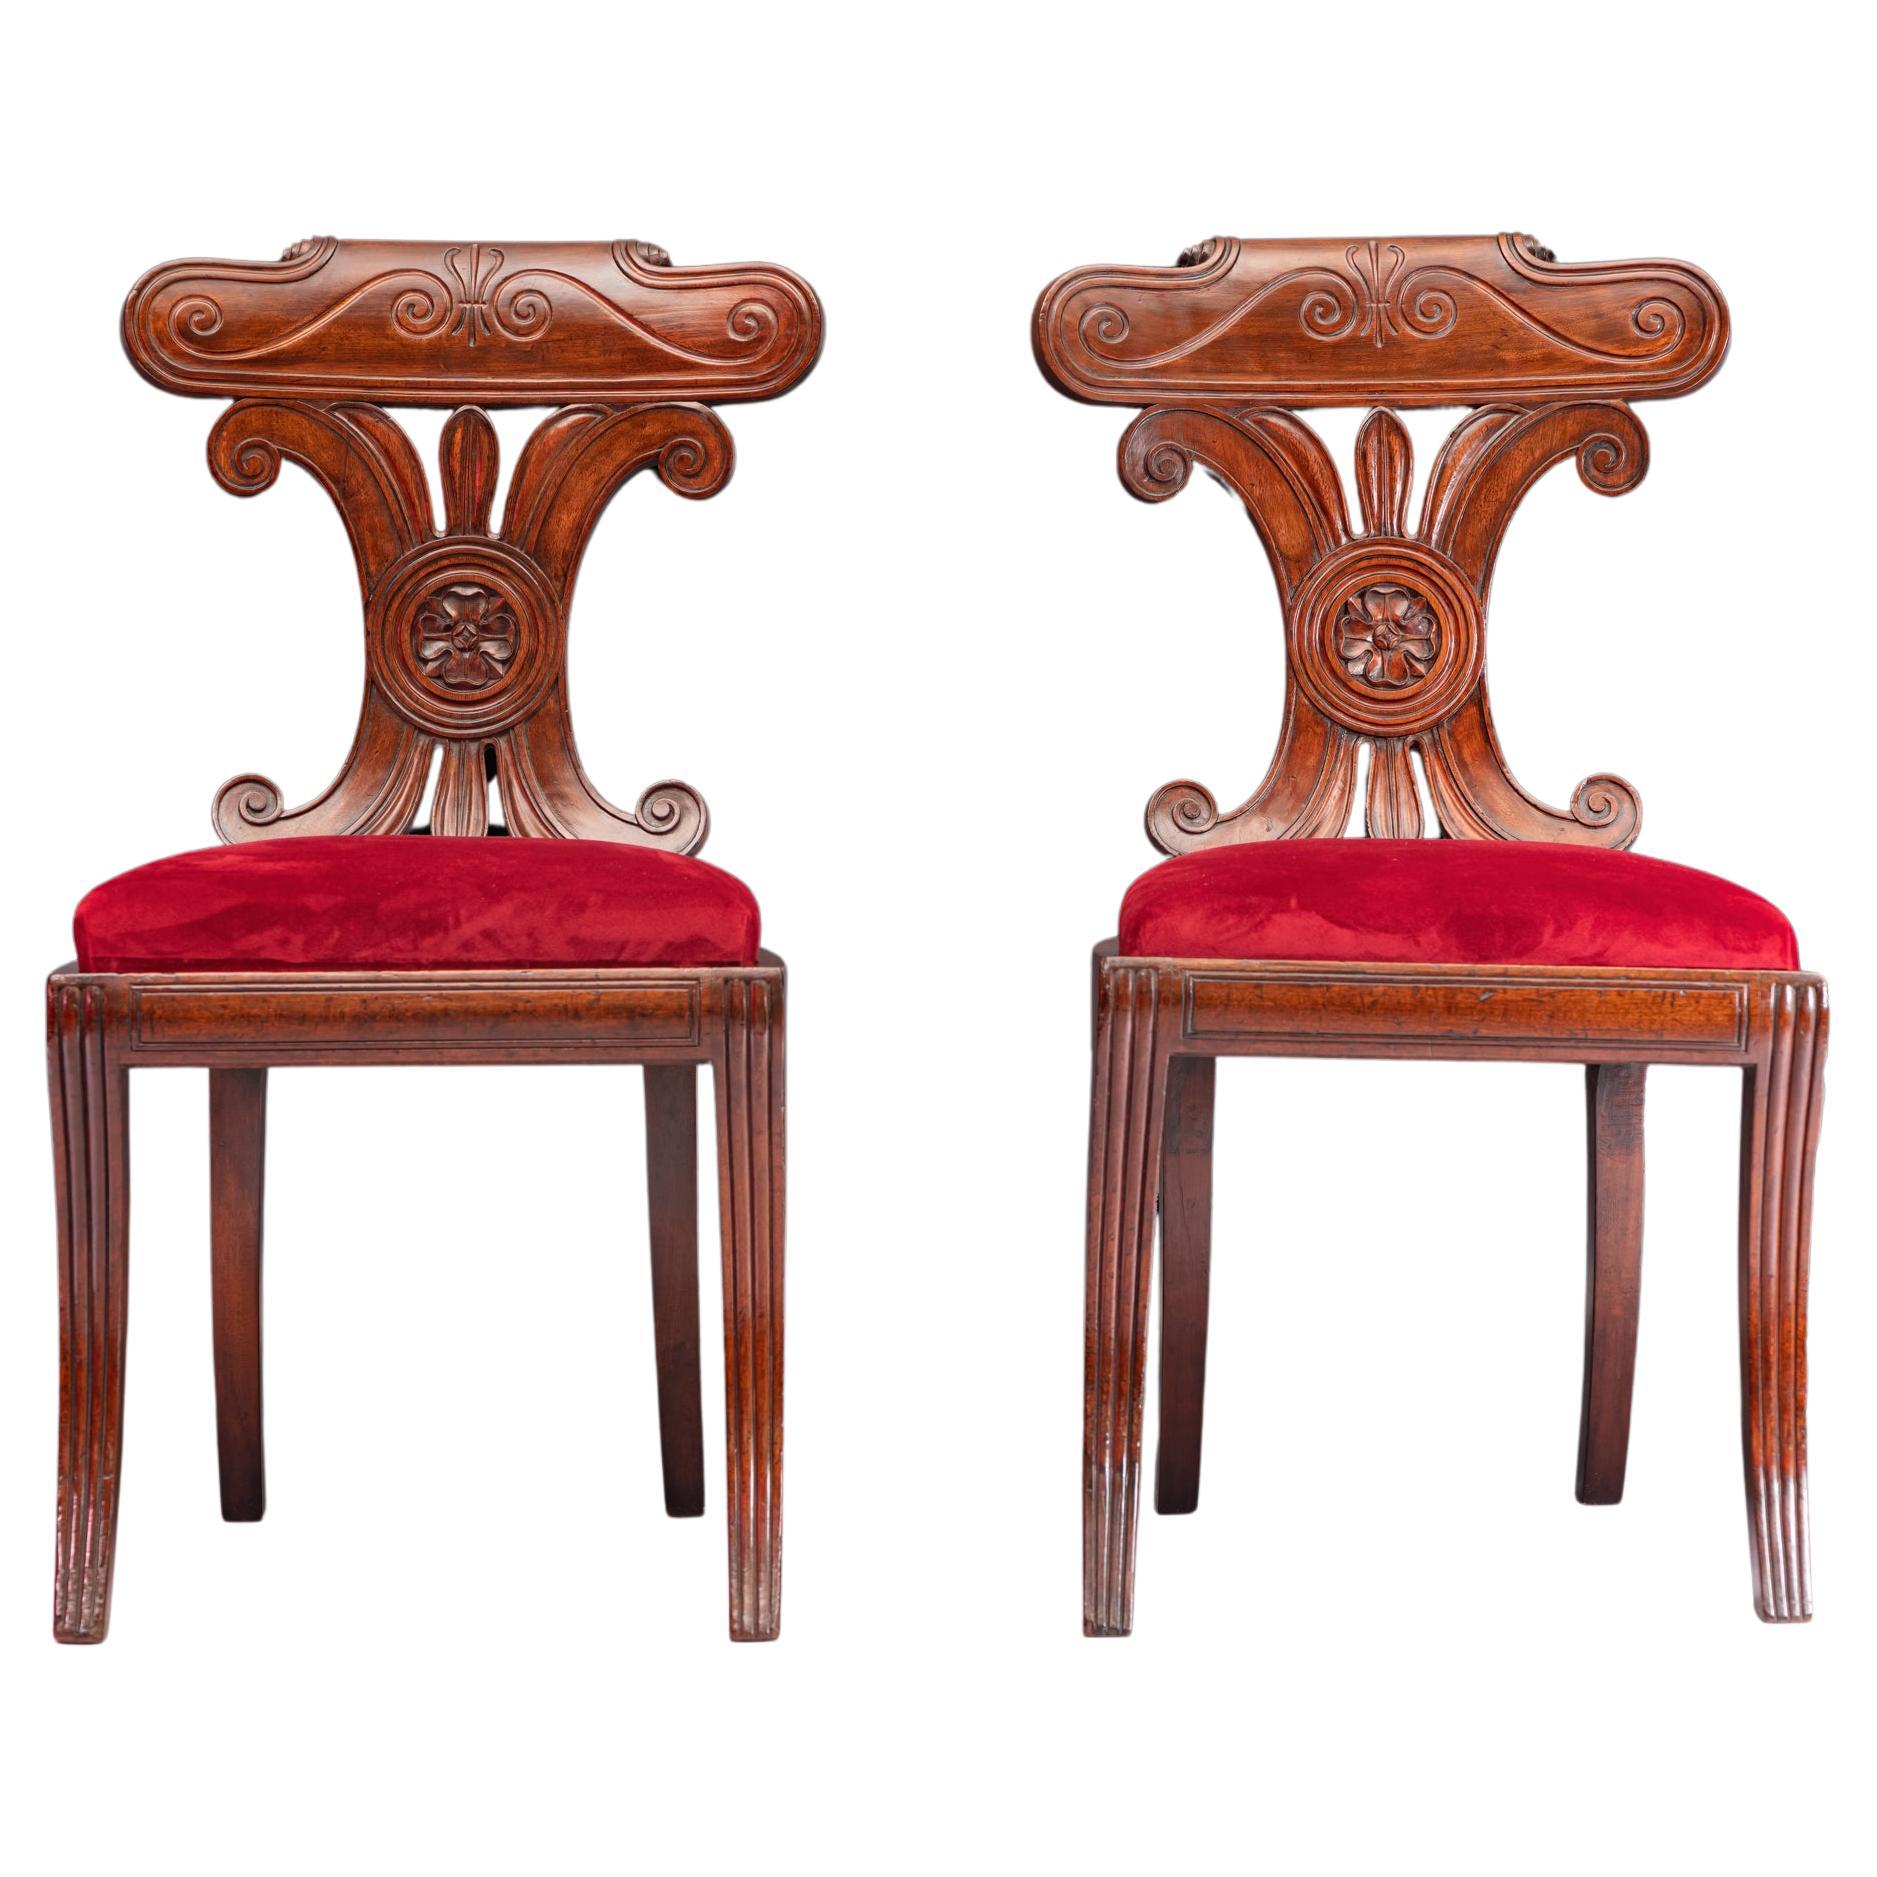 Pair Of Early 19th Century Irish Neo-Grecian Style Regency Side / Hall Chairs